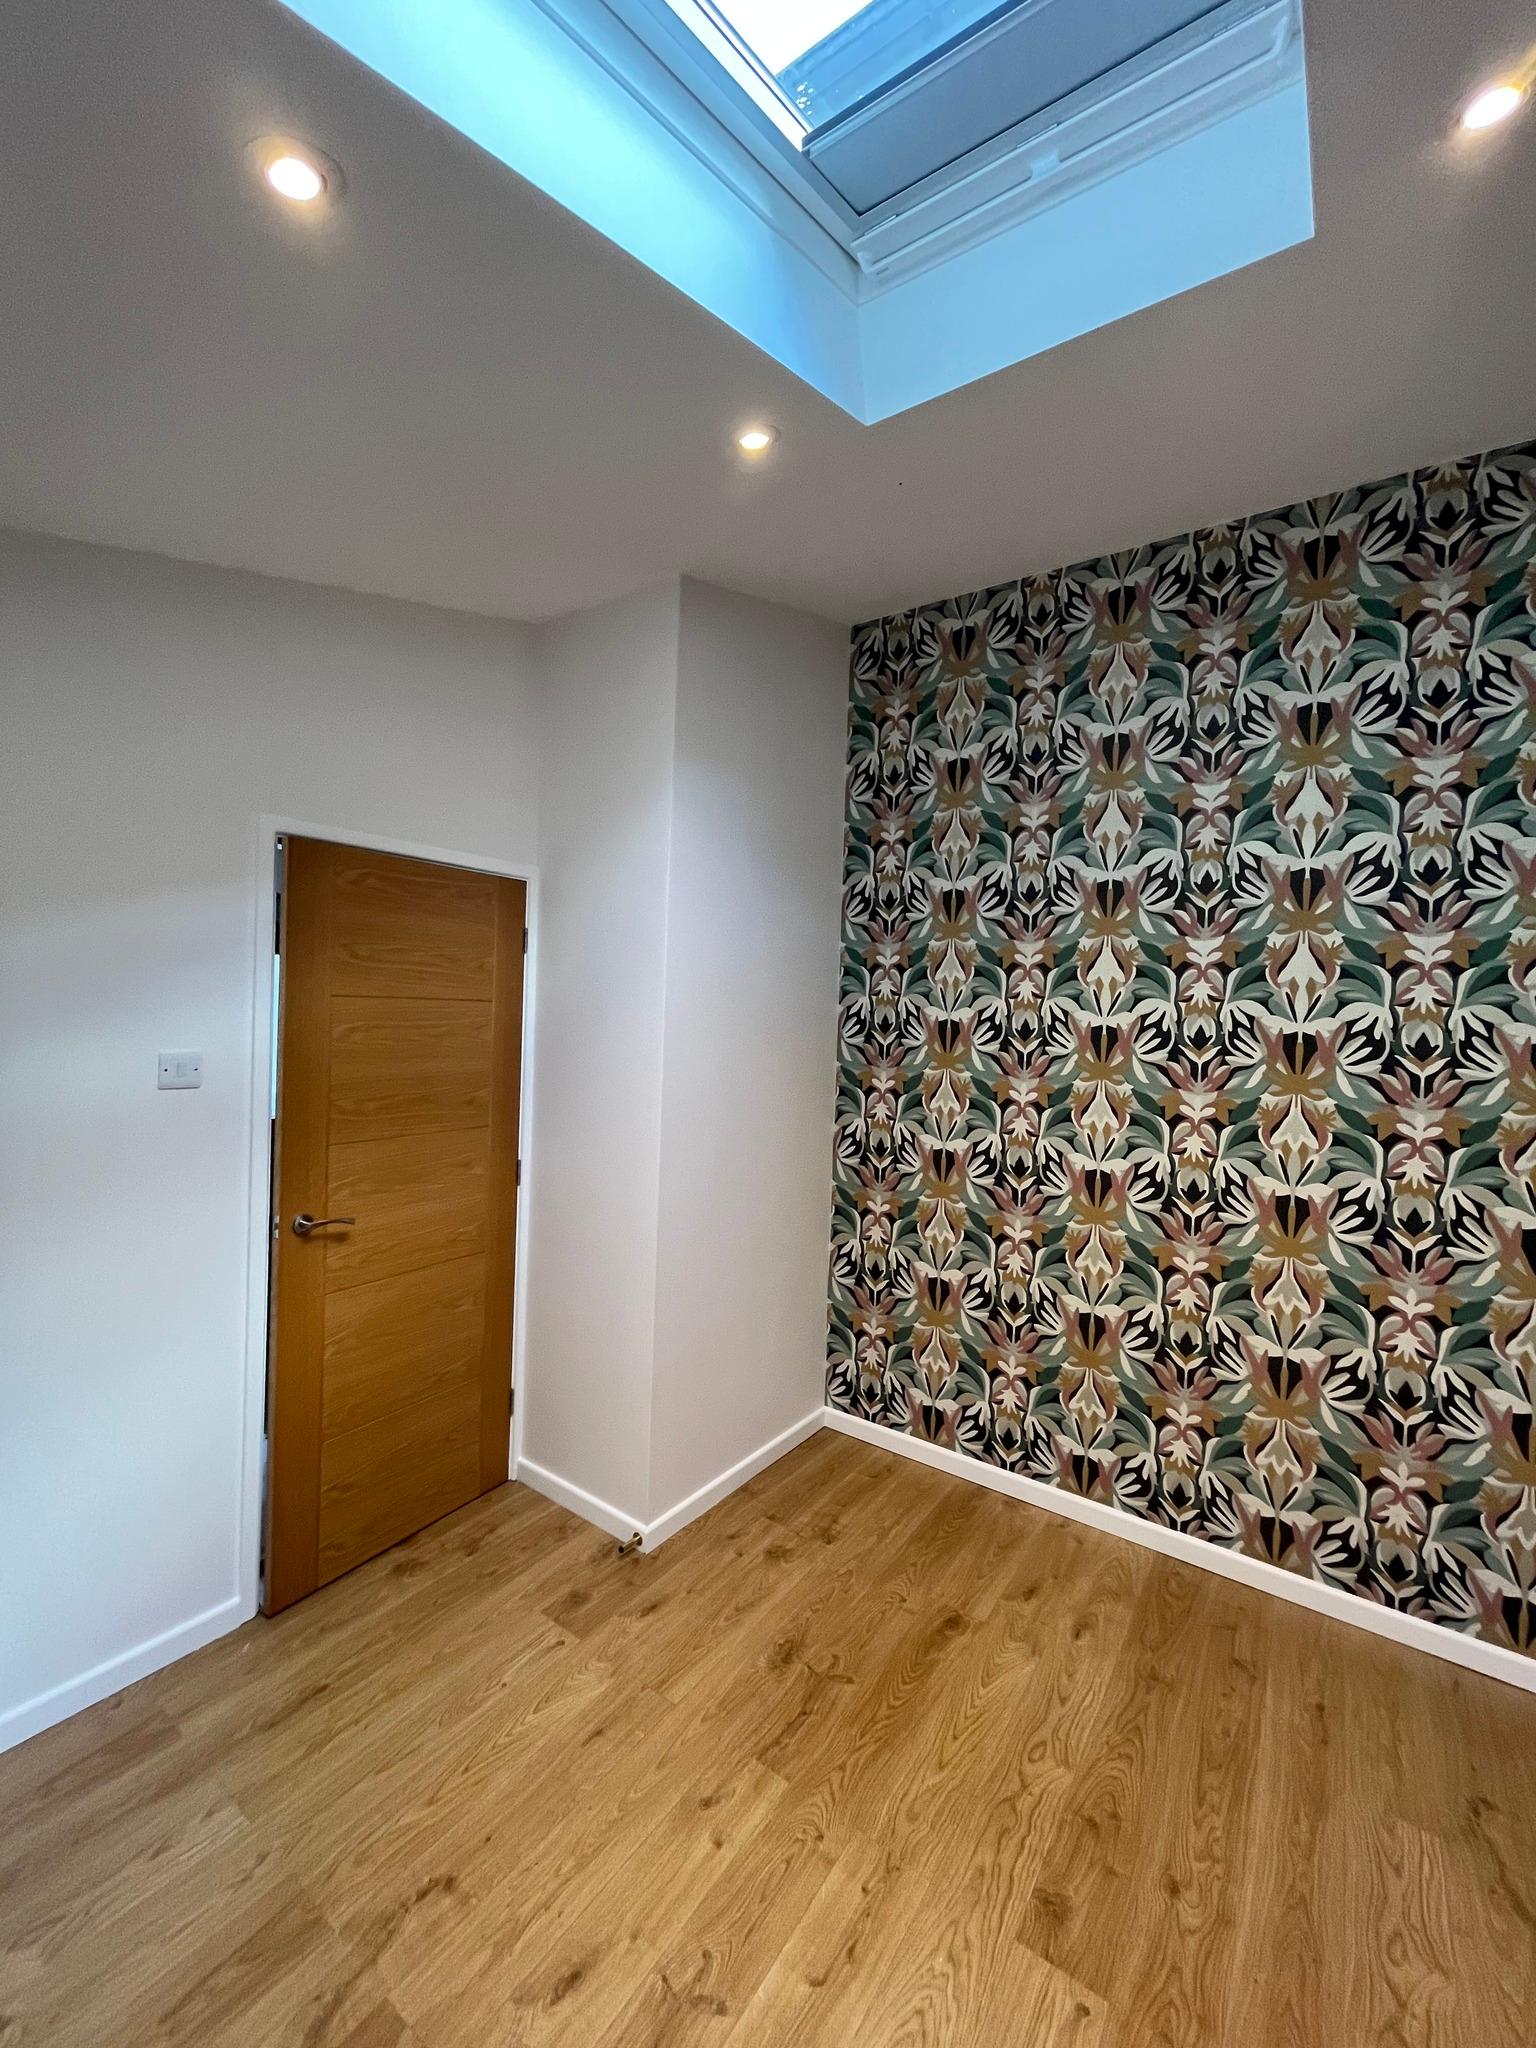 feature wallpapered pattern